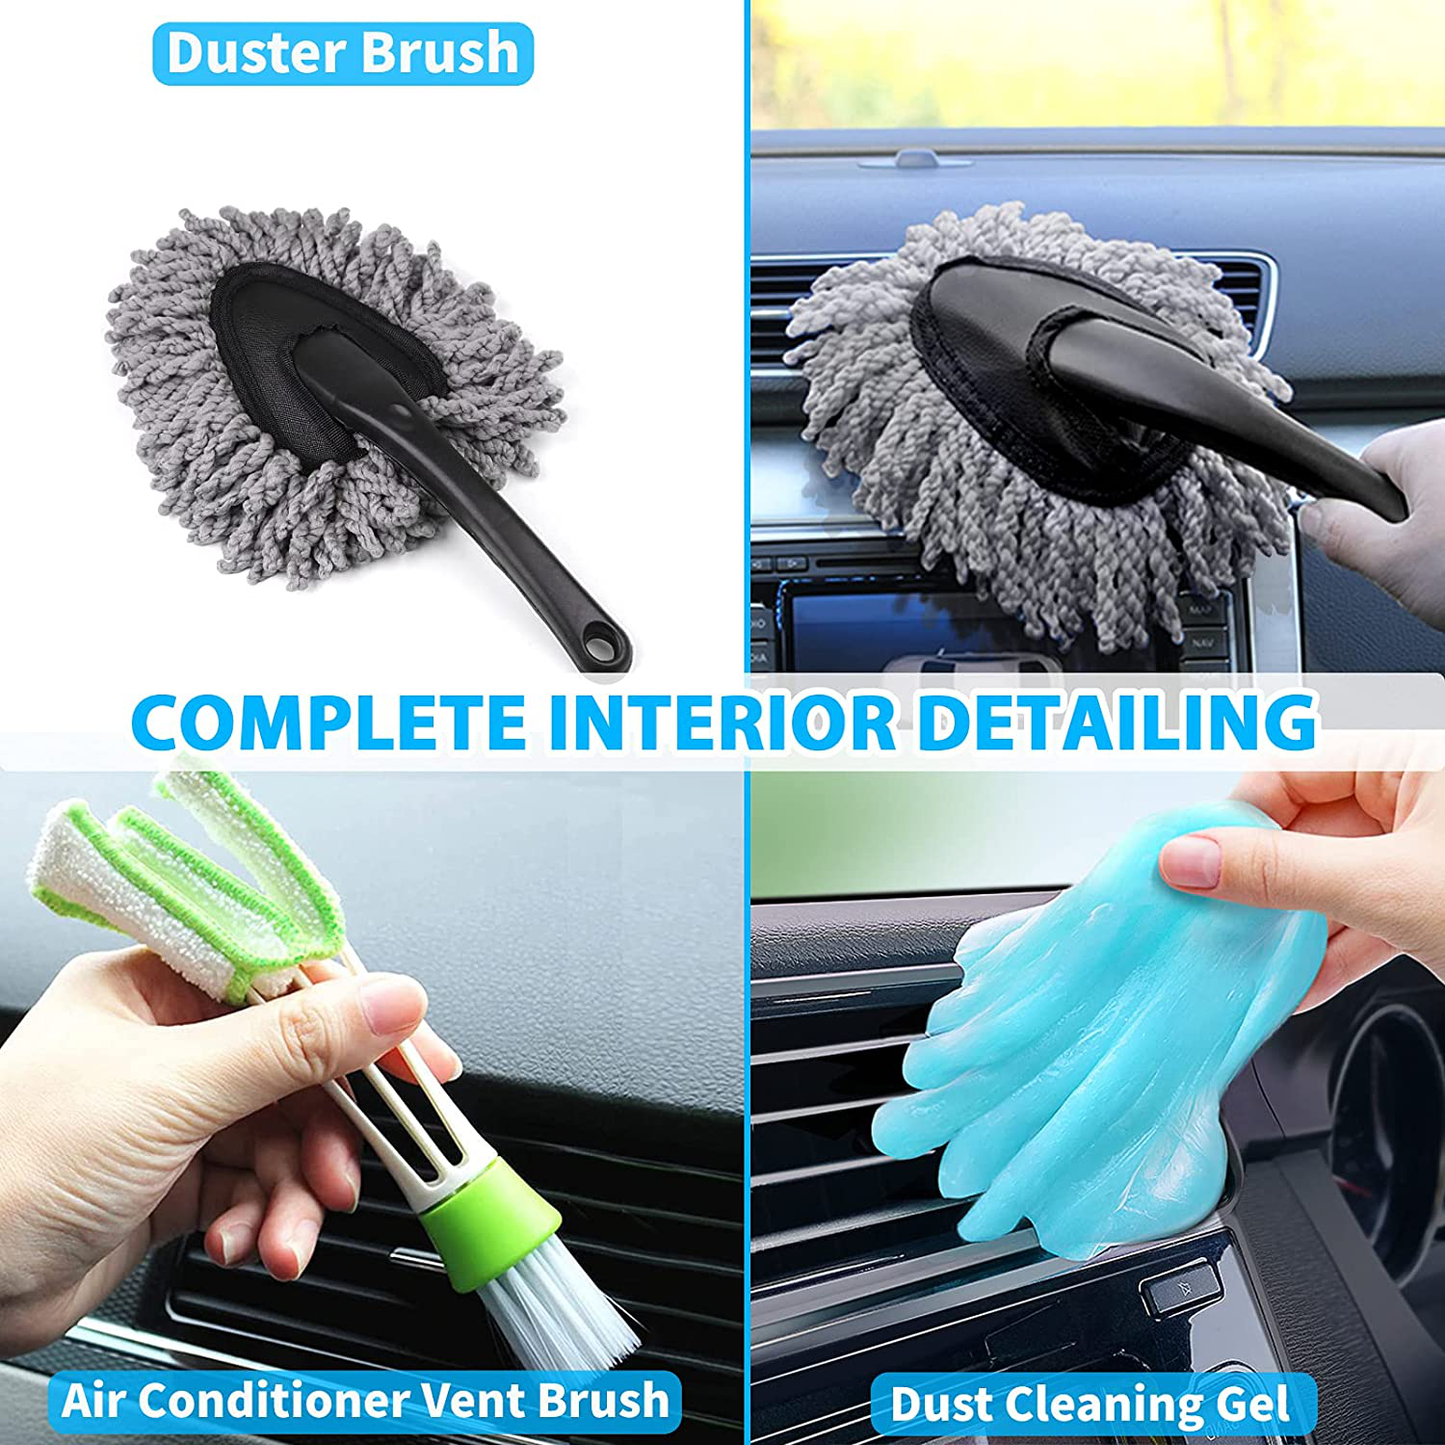 23PCS Car Wash Cleaning Tools Kit,Car Detailing Set with Tool Box,Exterior & Interior Car Accessories Cleaner Kit with Microfiber Cleaning Cloth,Wash Mitt, Duster,Cleaning Gel,Squeegee, Waxing Sponge